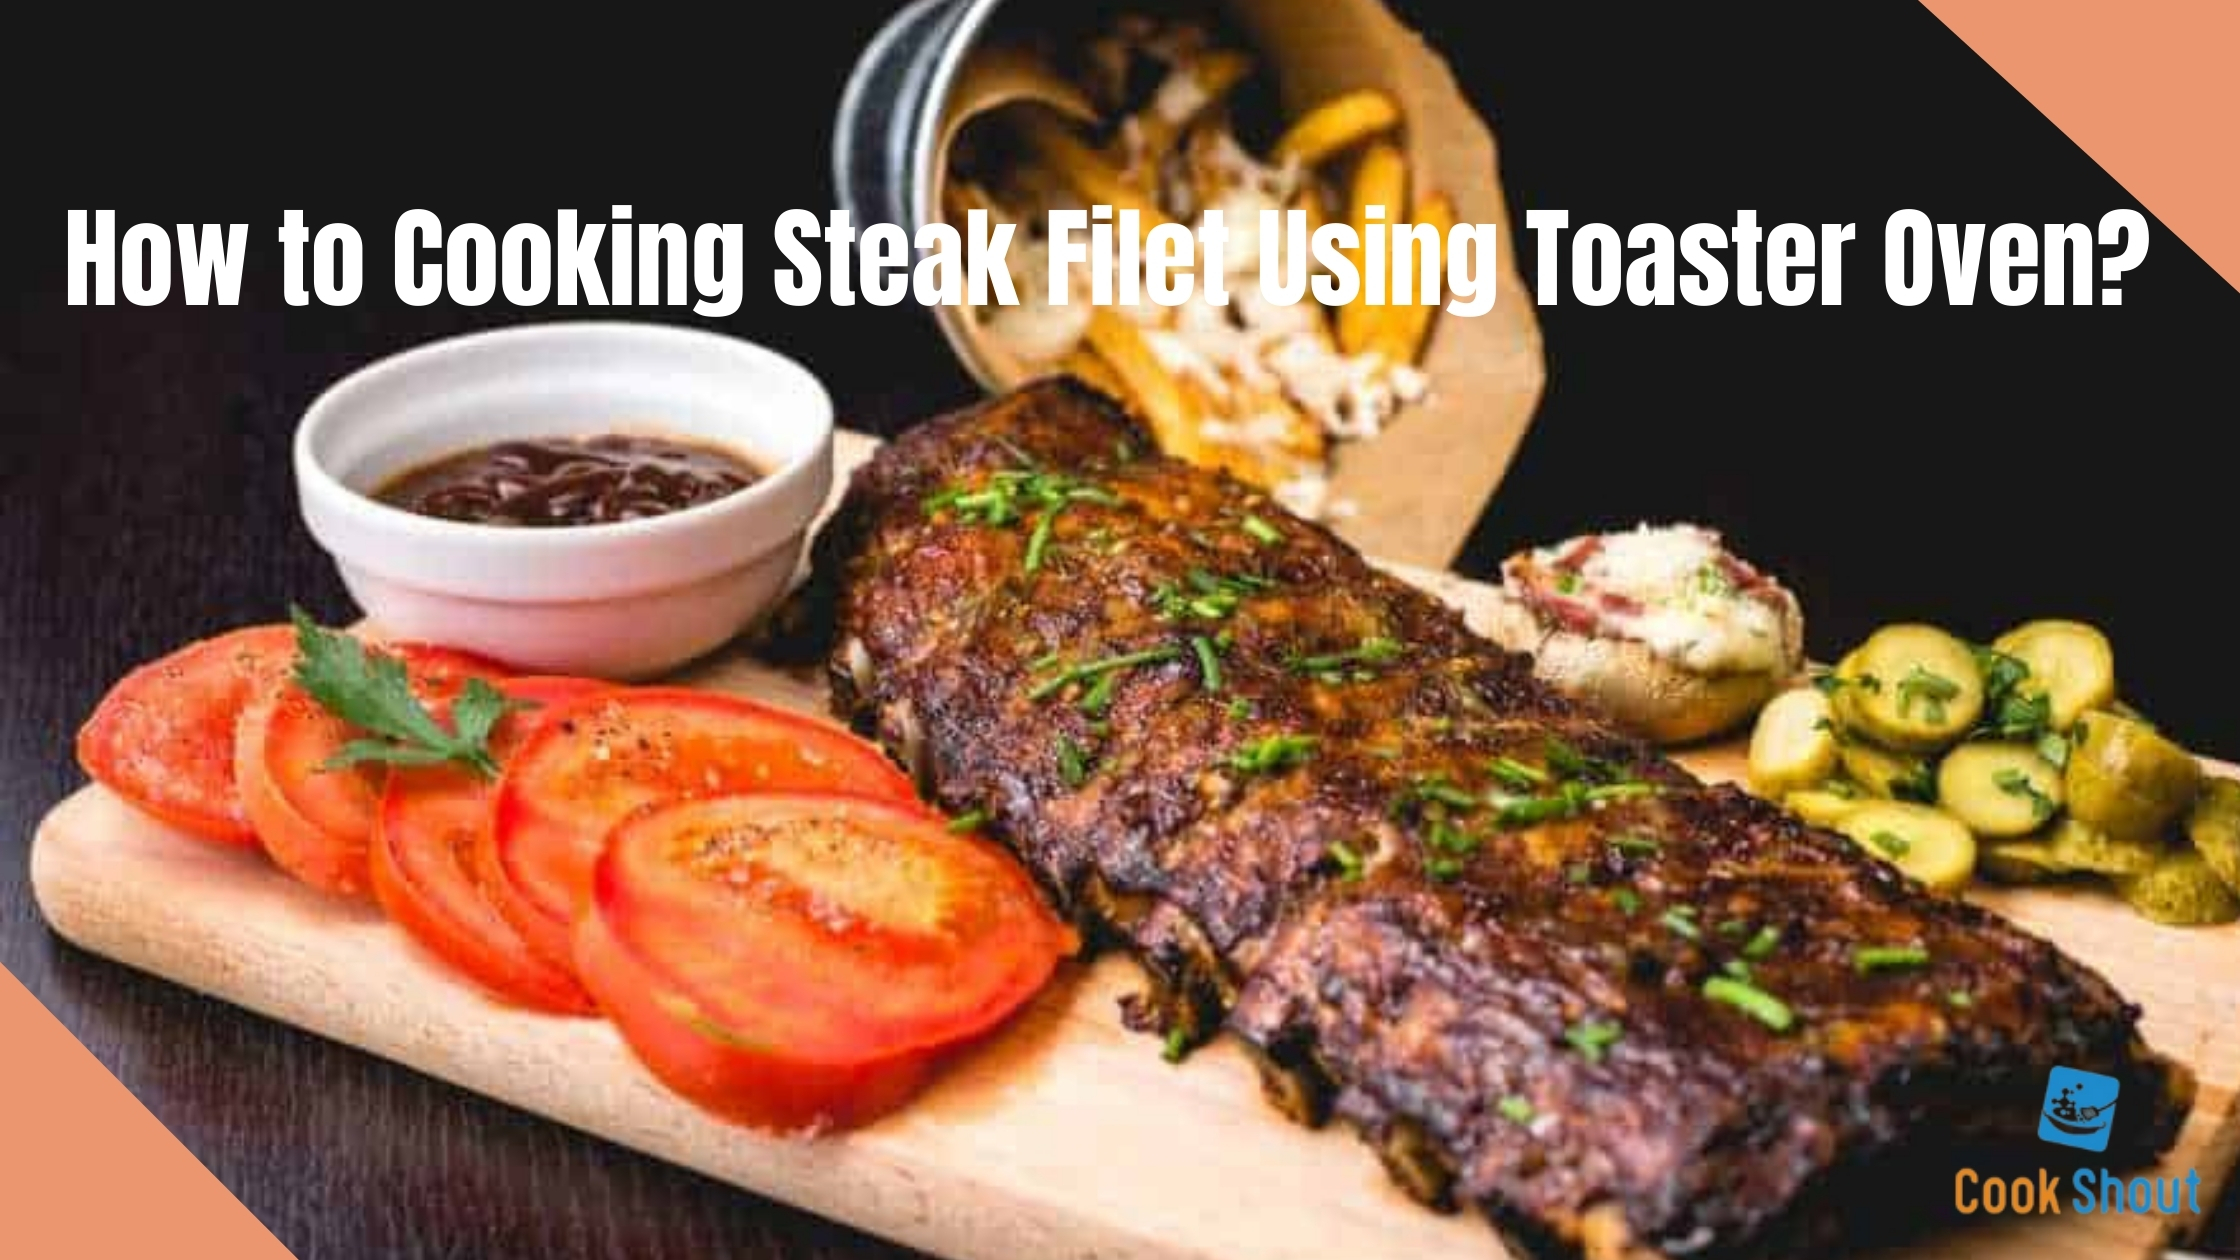 How to Cooking Steak Filet Using Toaster Oven 2